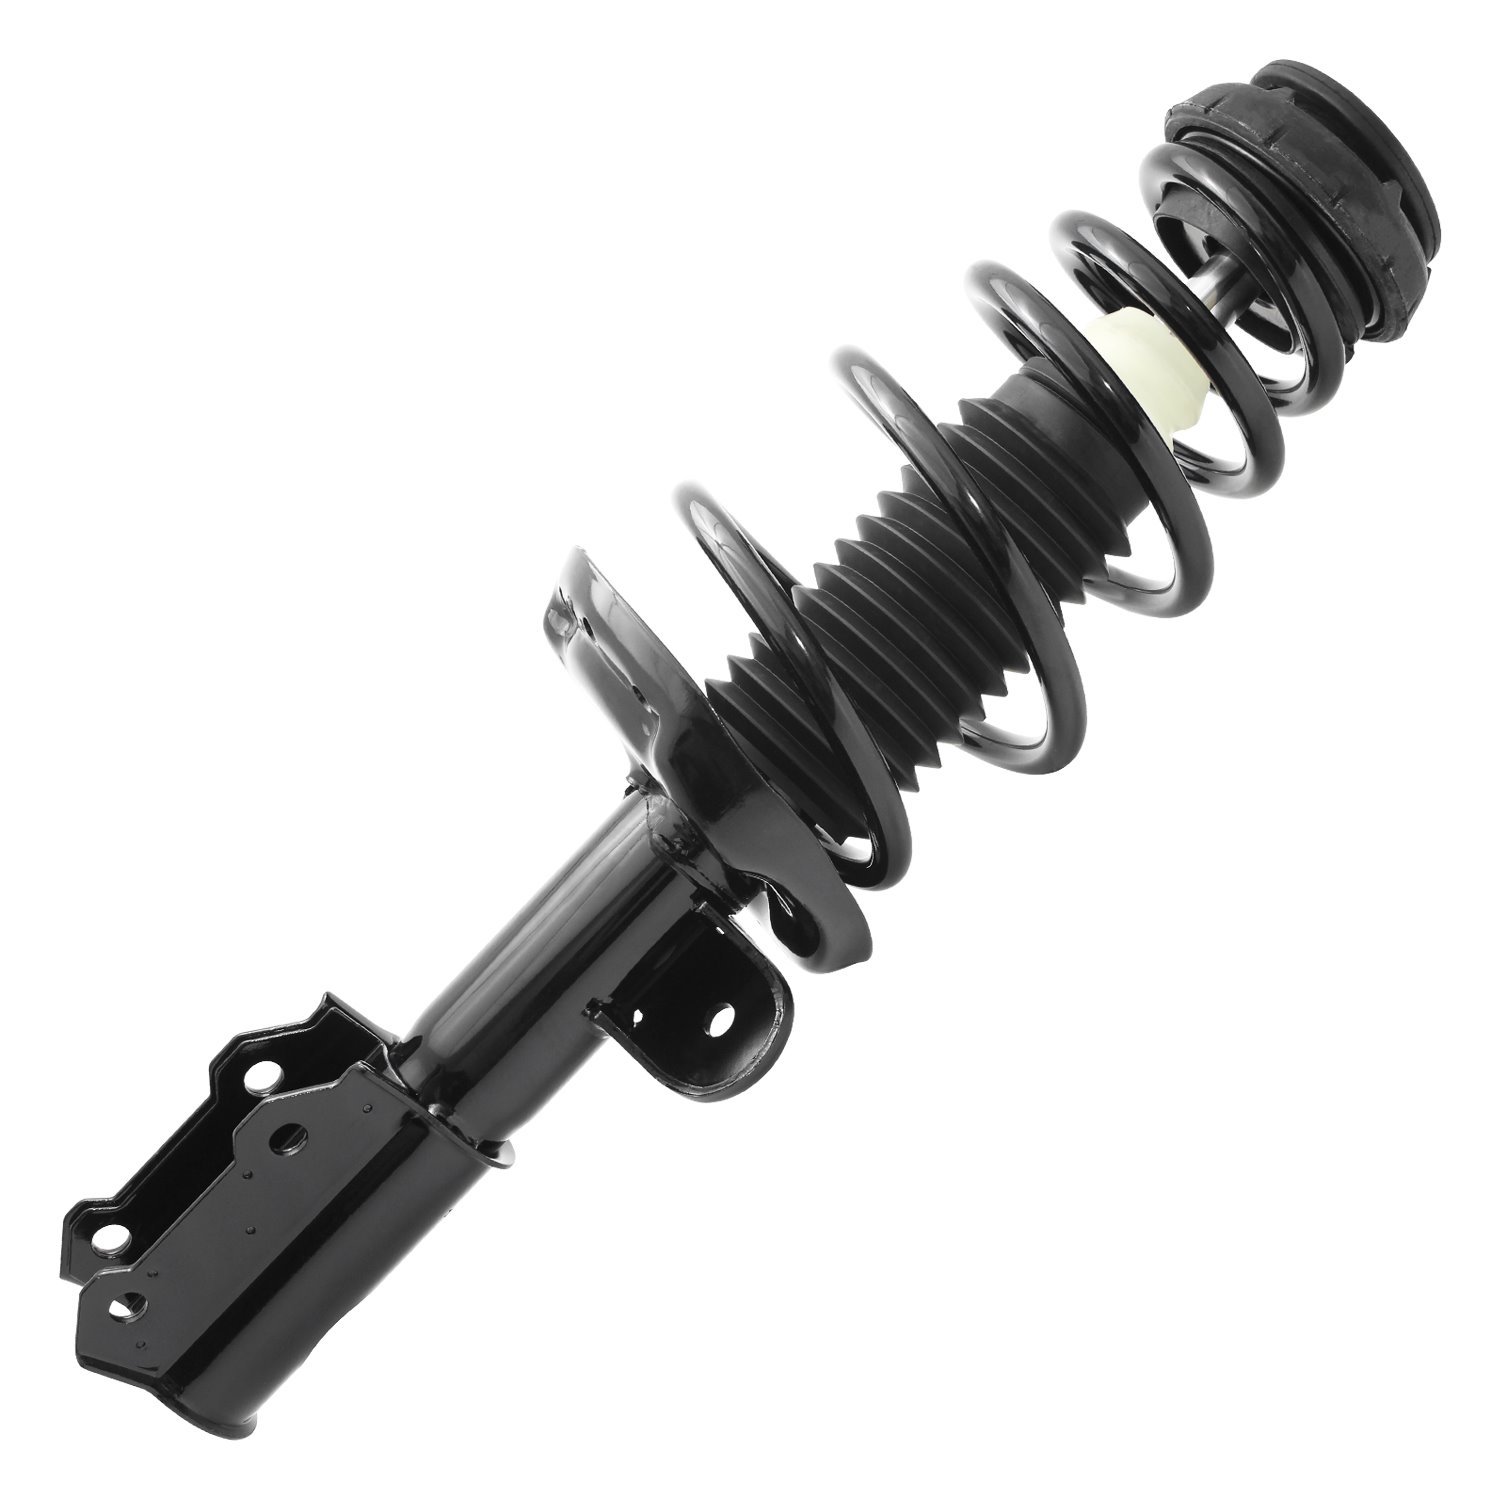 11885 Suspension Strut & Coil Spring Assembly Fits Select Chevy Cruze